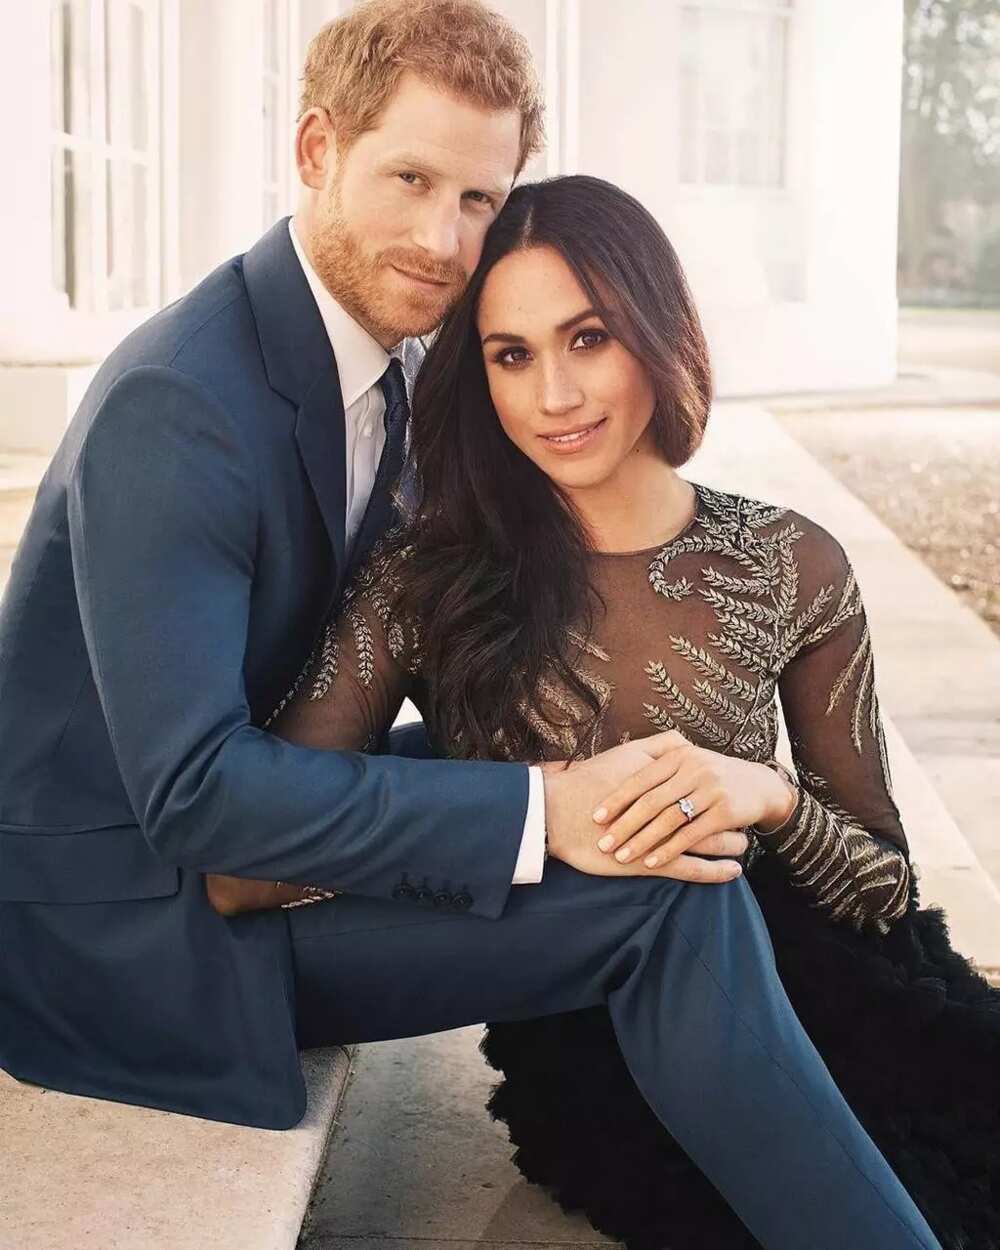 Prince Harry and Meghan engaged